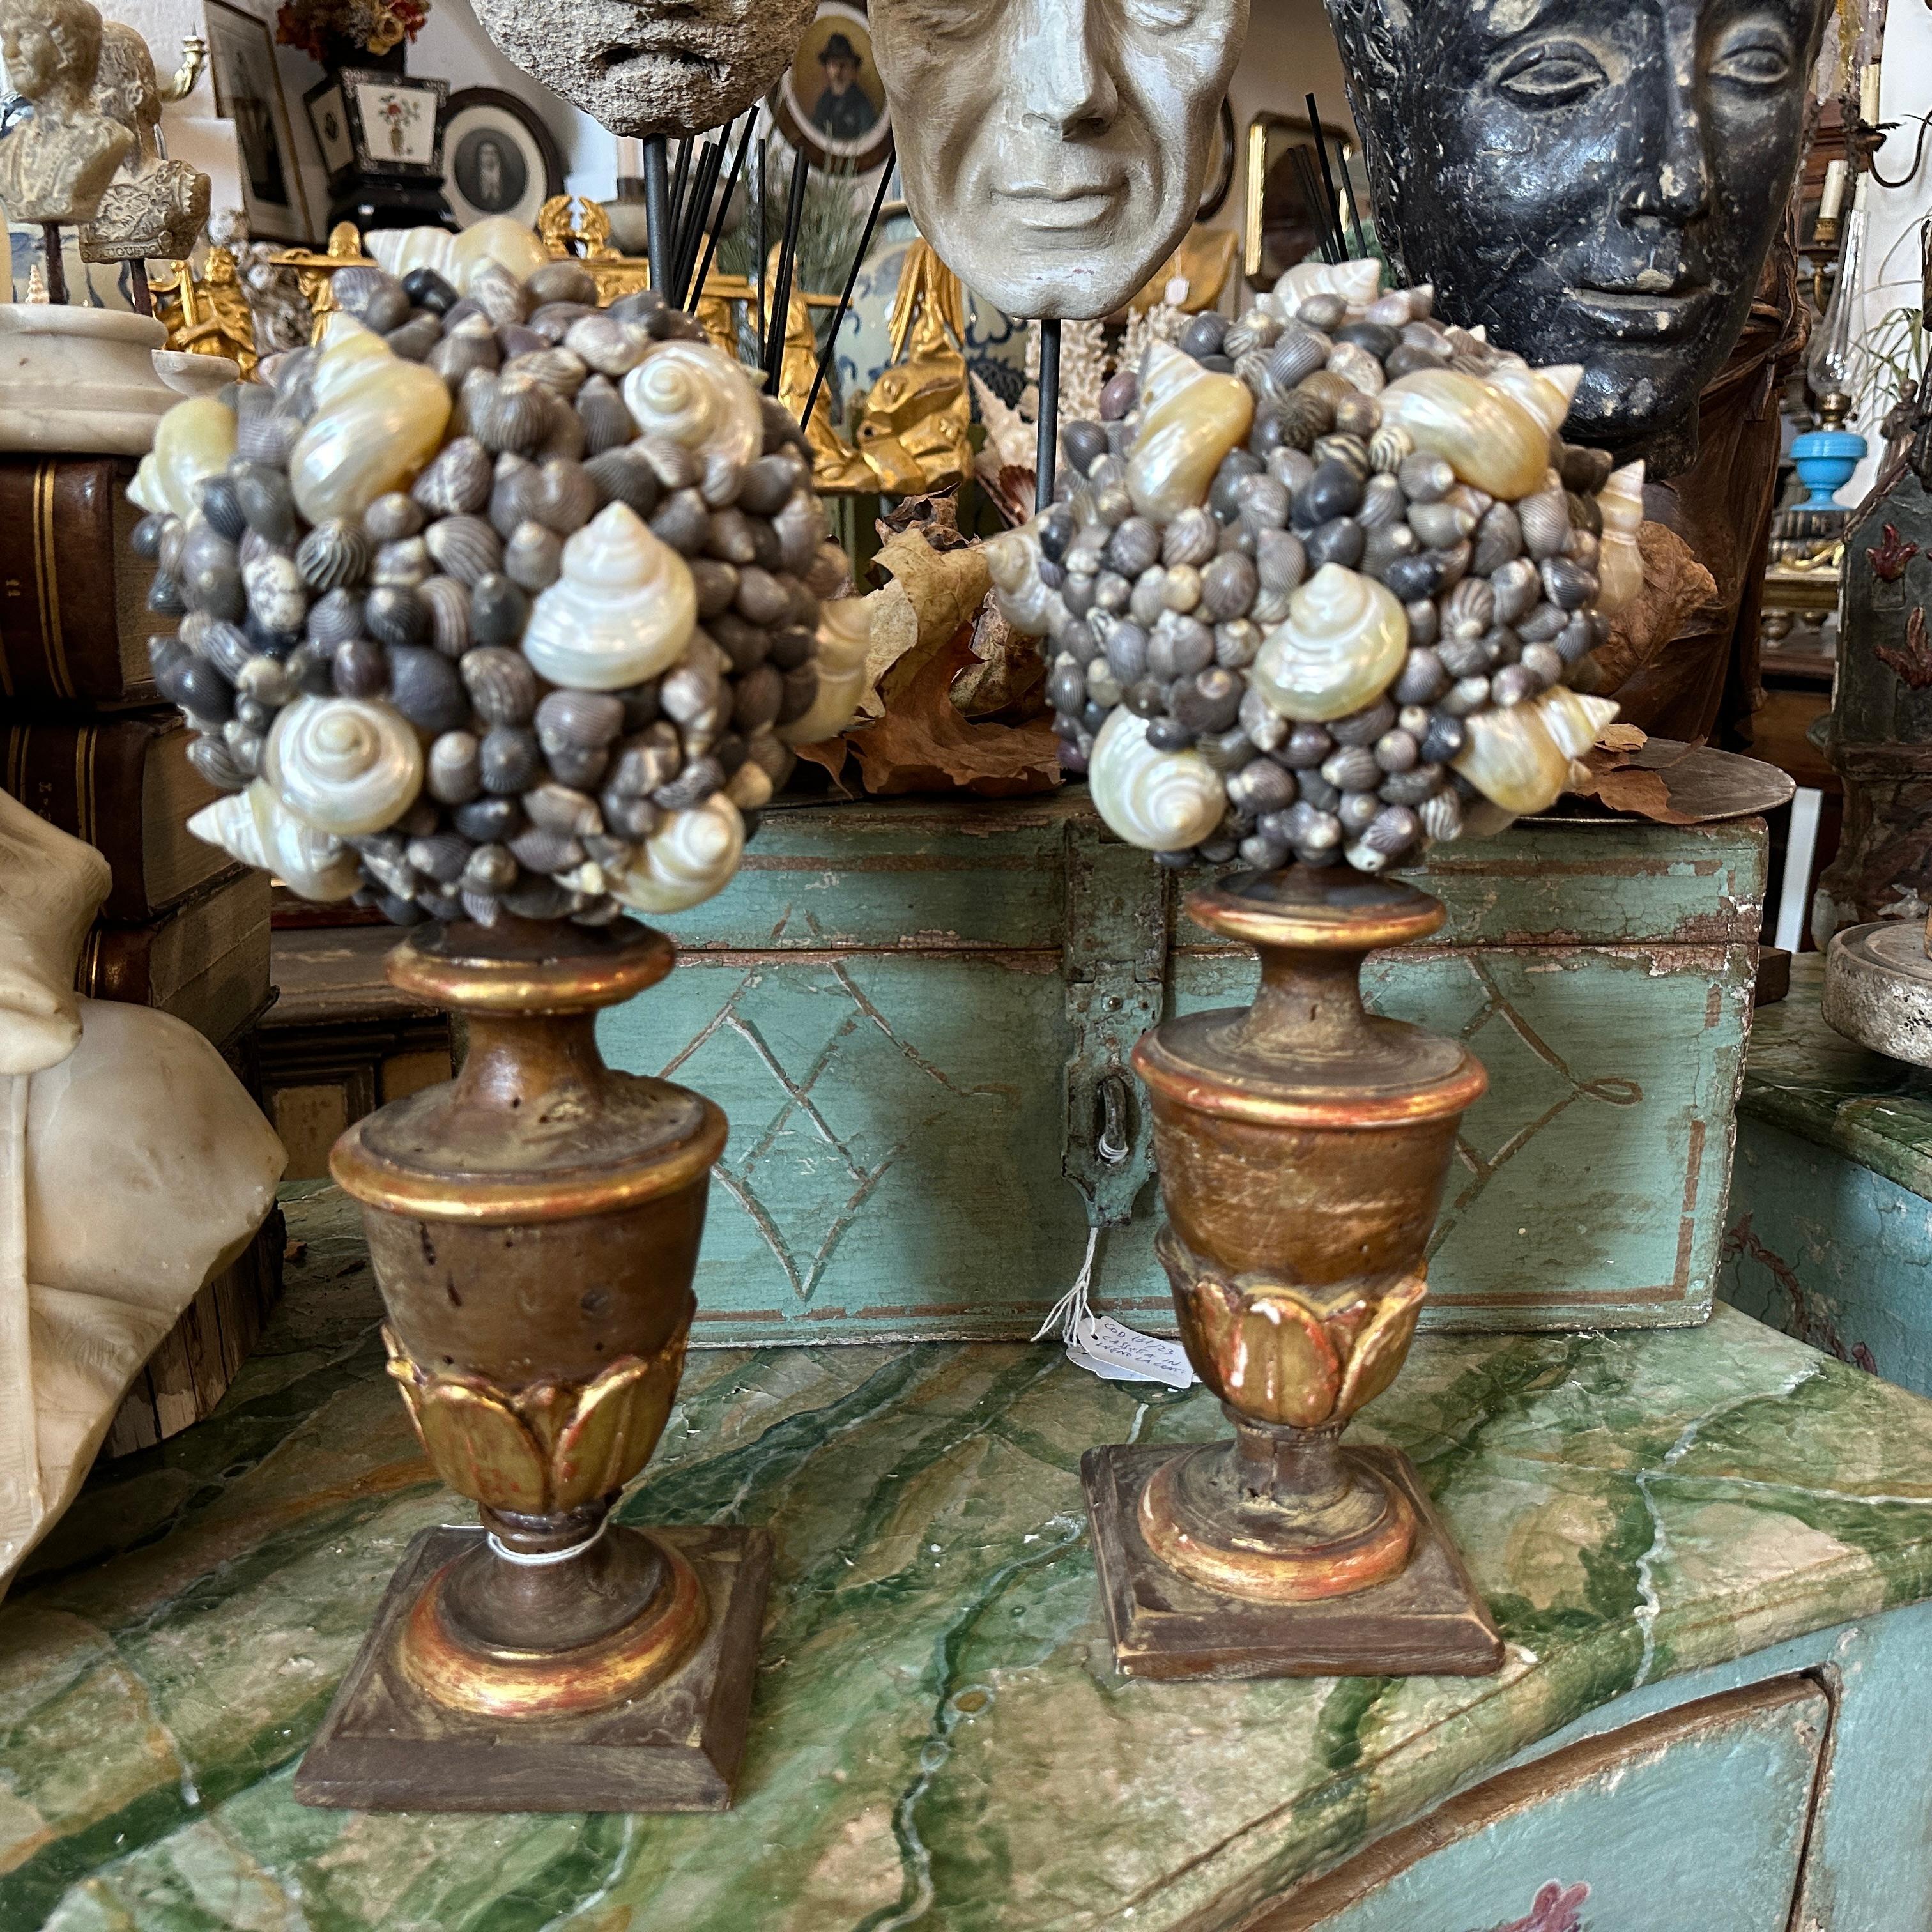 Two lacquered wood palm holders with a shell composition, handcrafted in Sicily in the late 19th century, are in original condition with signs of use and age. The palm holders were originally used to hold floral elements; these ones feature an